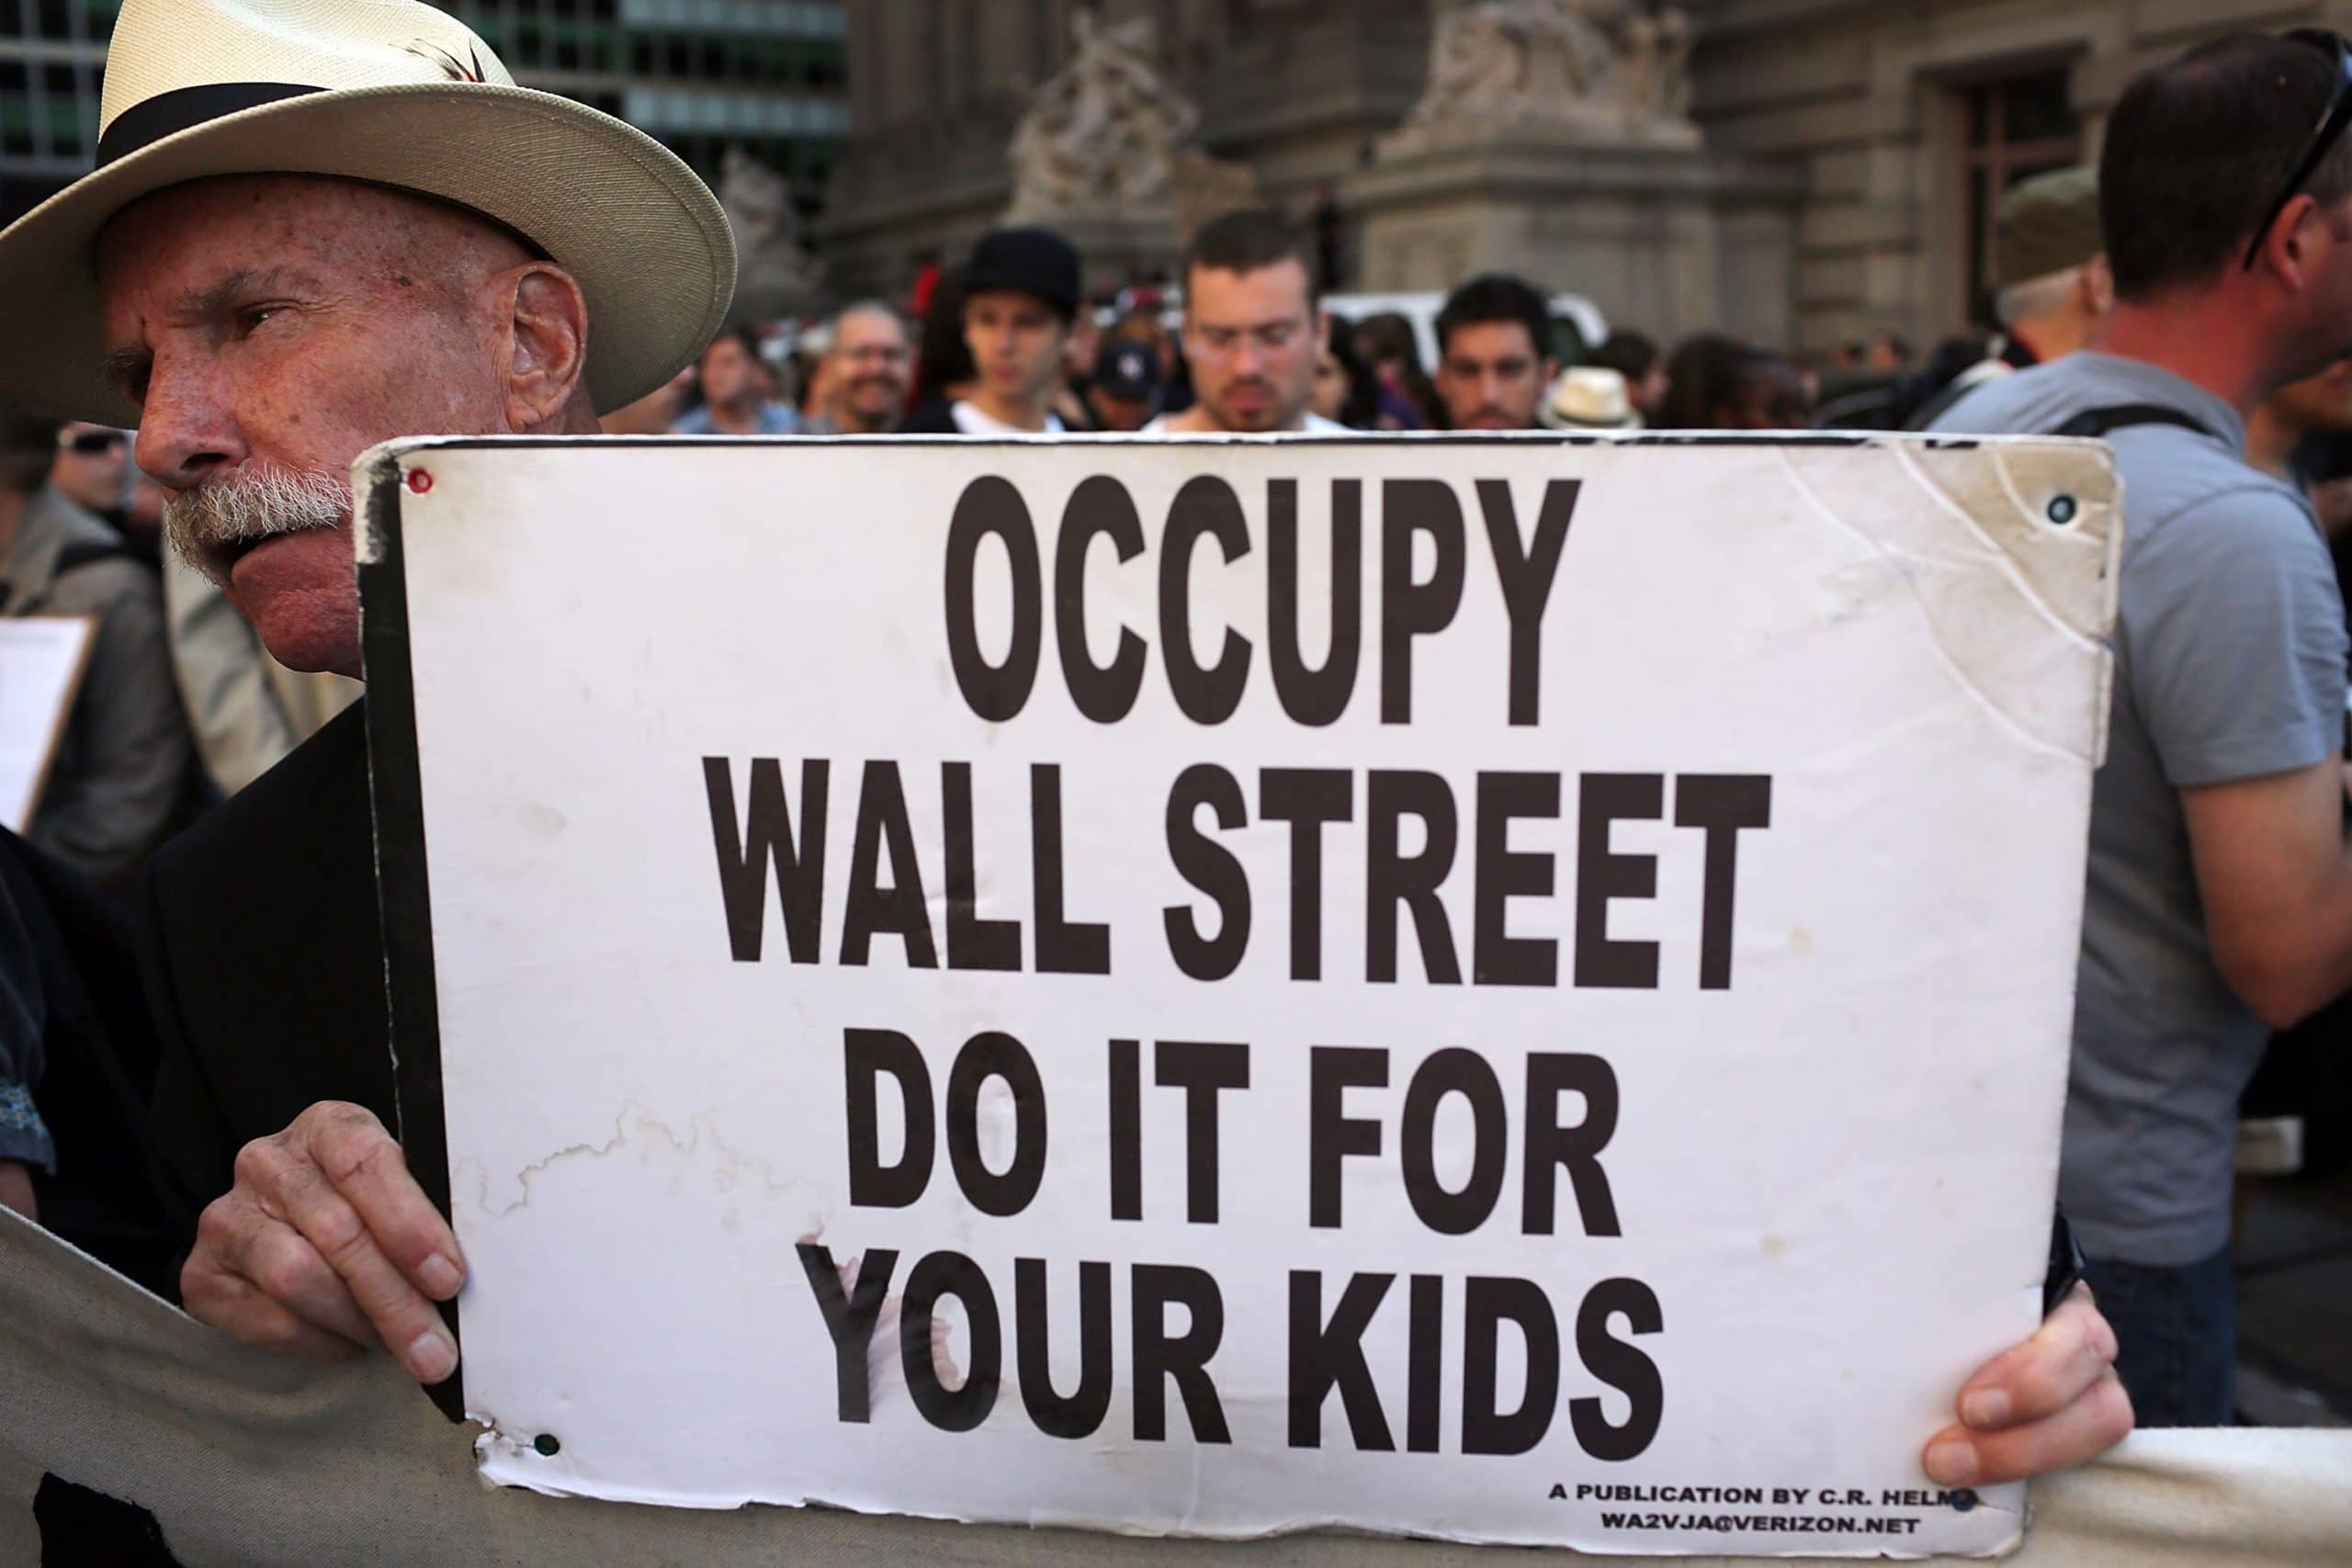 Banner reads "Occupy Wall Street, Do It For Your Kids"